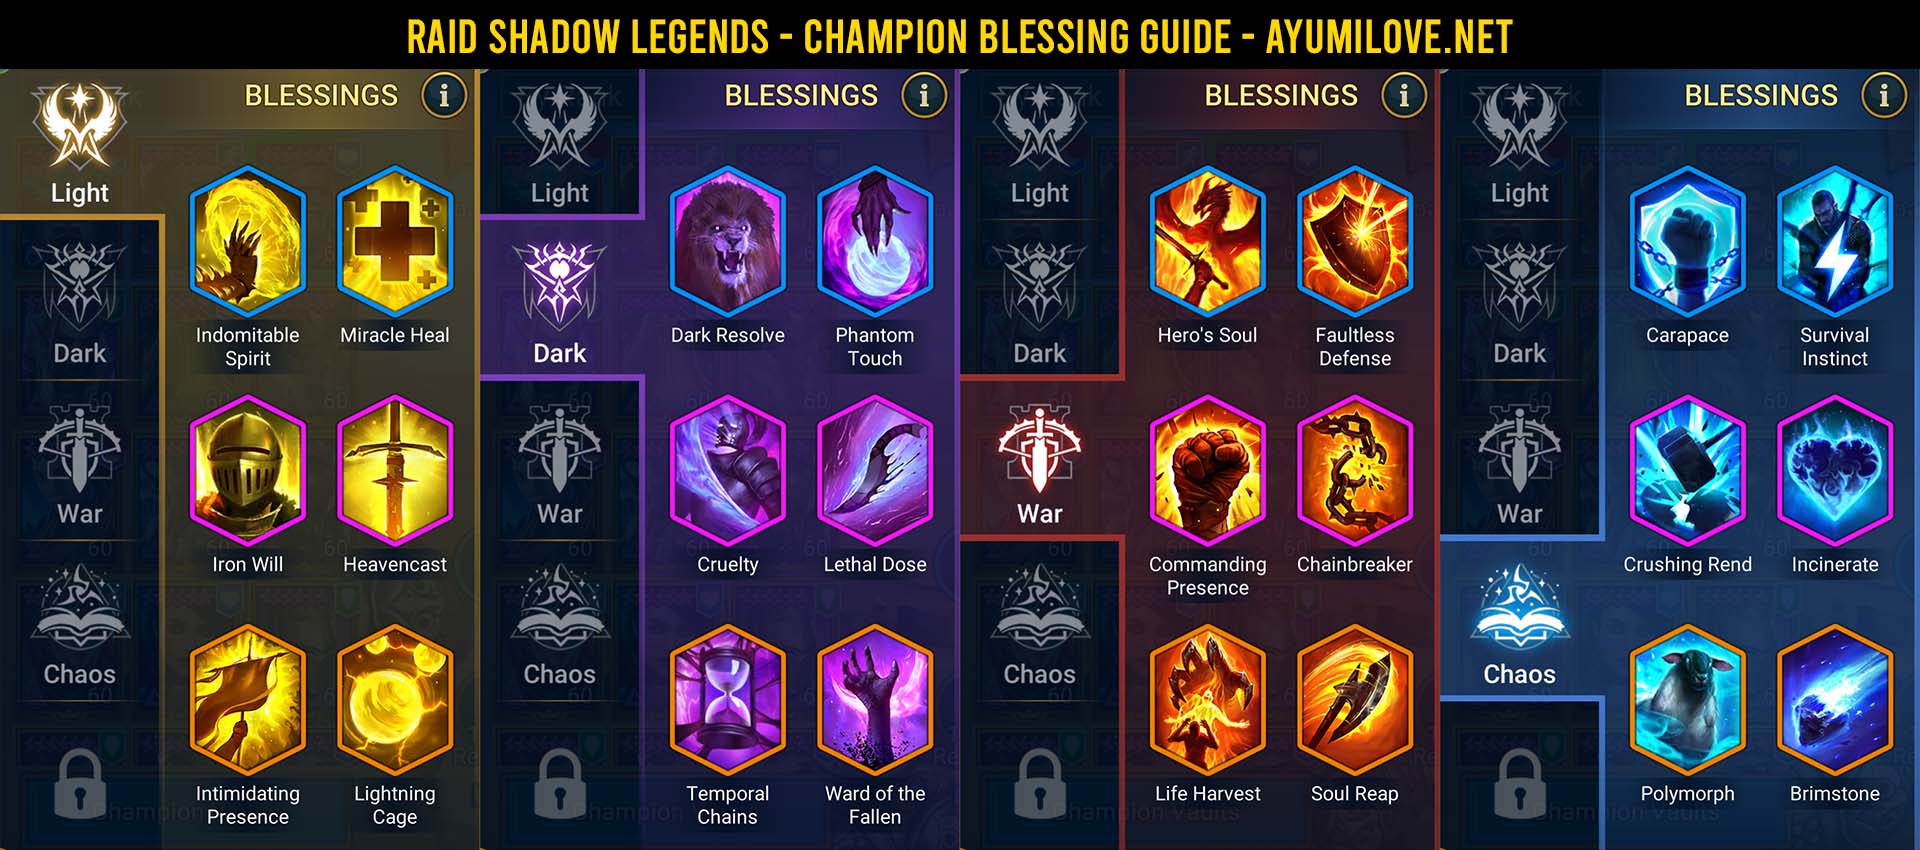 5 PROMO CODES FOR RAID SHADOW LEGENDS SEPTEMBER 2022! ALL WORKING